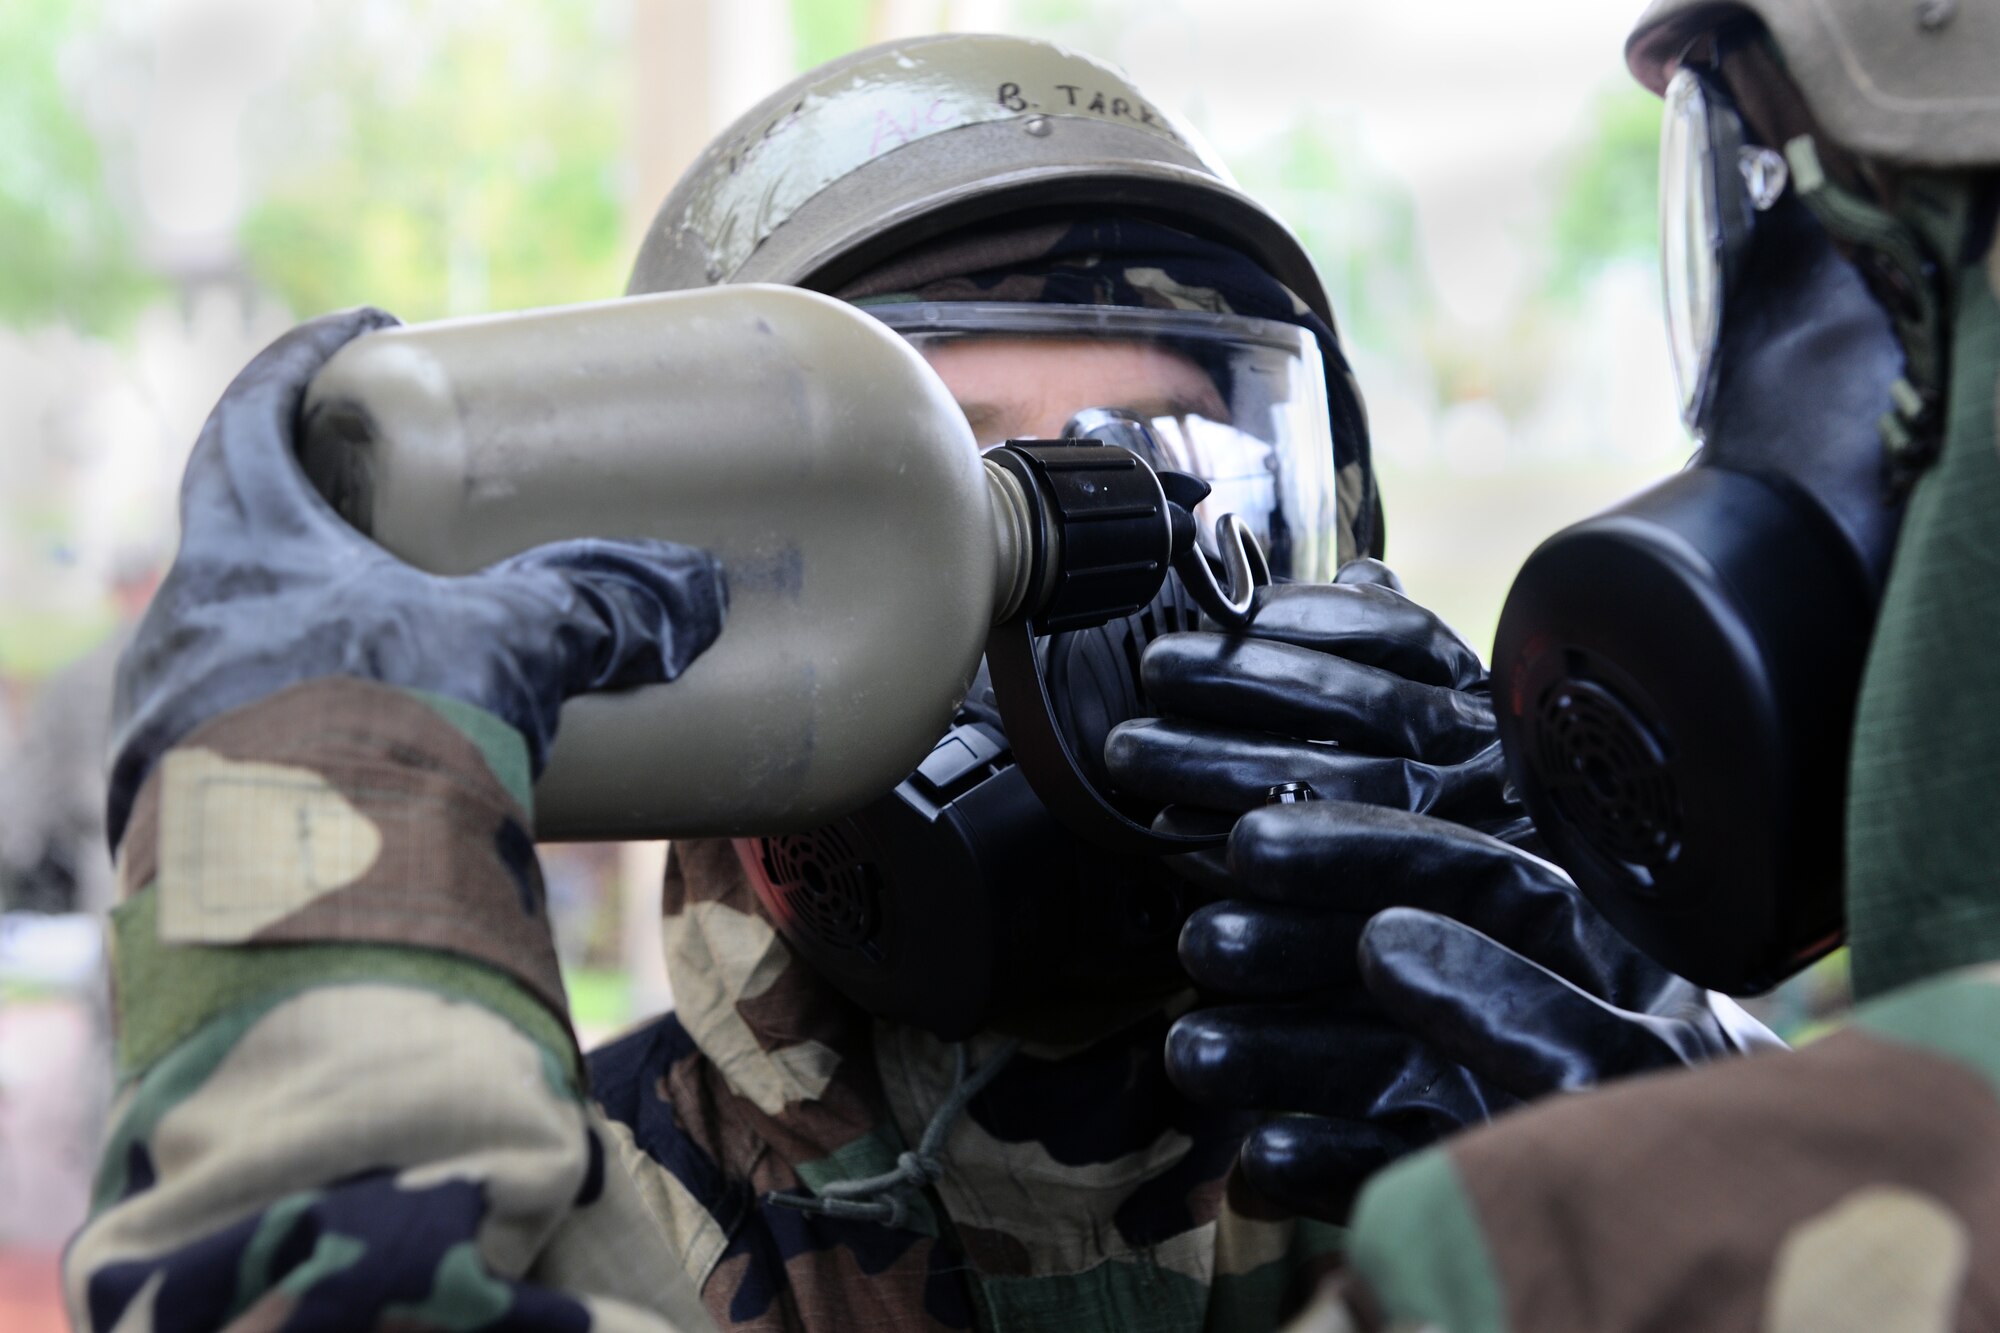 SPANGDAHLEM AIR BASE, Germany – An Airman from the 52nd Fighter Wing drinks water through an M50 joint service general purpose gas mask during individual core competency skills training at the outdoor basketball court here May 7. The training evaluated Airmen on their combat readiness skills such as M-4 assault rifle weapons knowledge; self-aid buddy care; and chemical, biological, radiological, nuclear, and high-yield explosive preparedness. The training ensures the 52nd Fighter Wing is able to provide combat power to the current fight. (U.S. Air Force photo by Airman 1st Class Dillon Davis/Released)